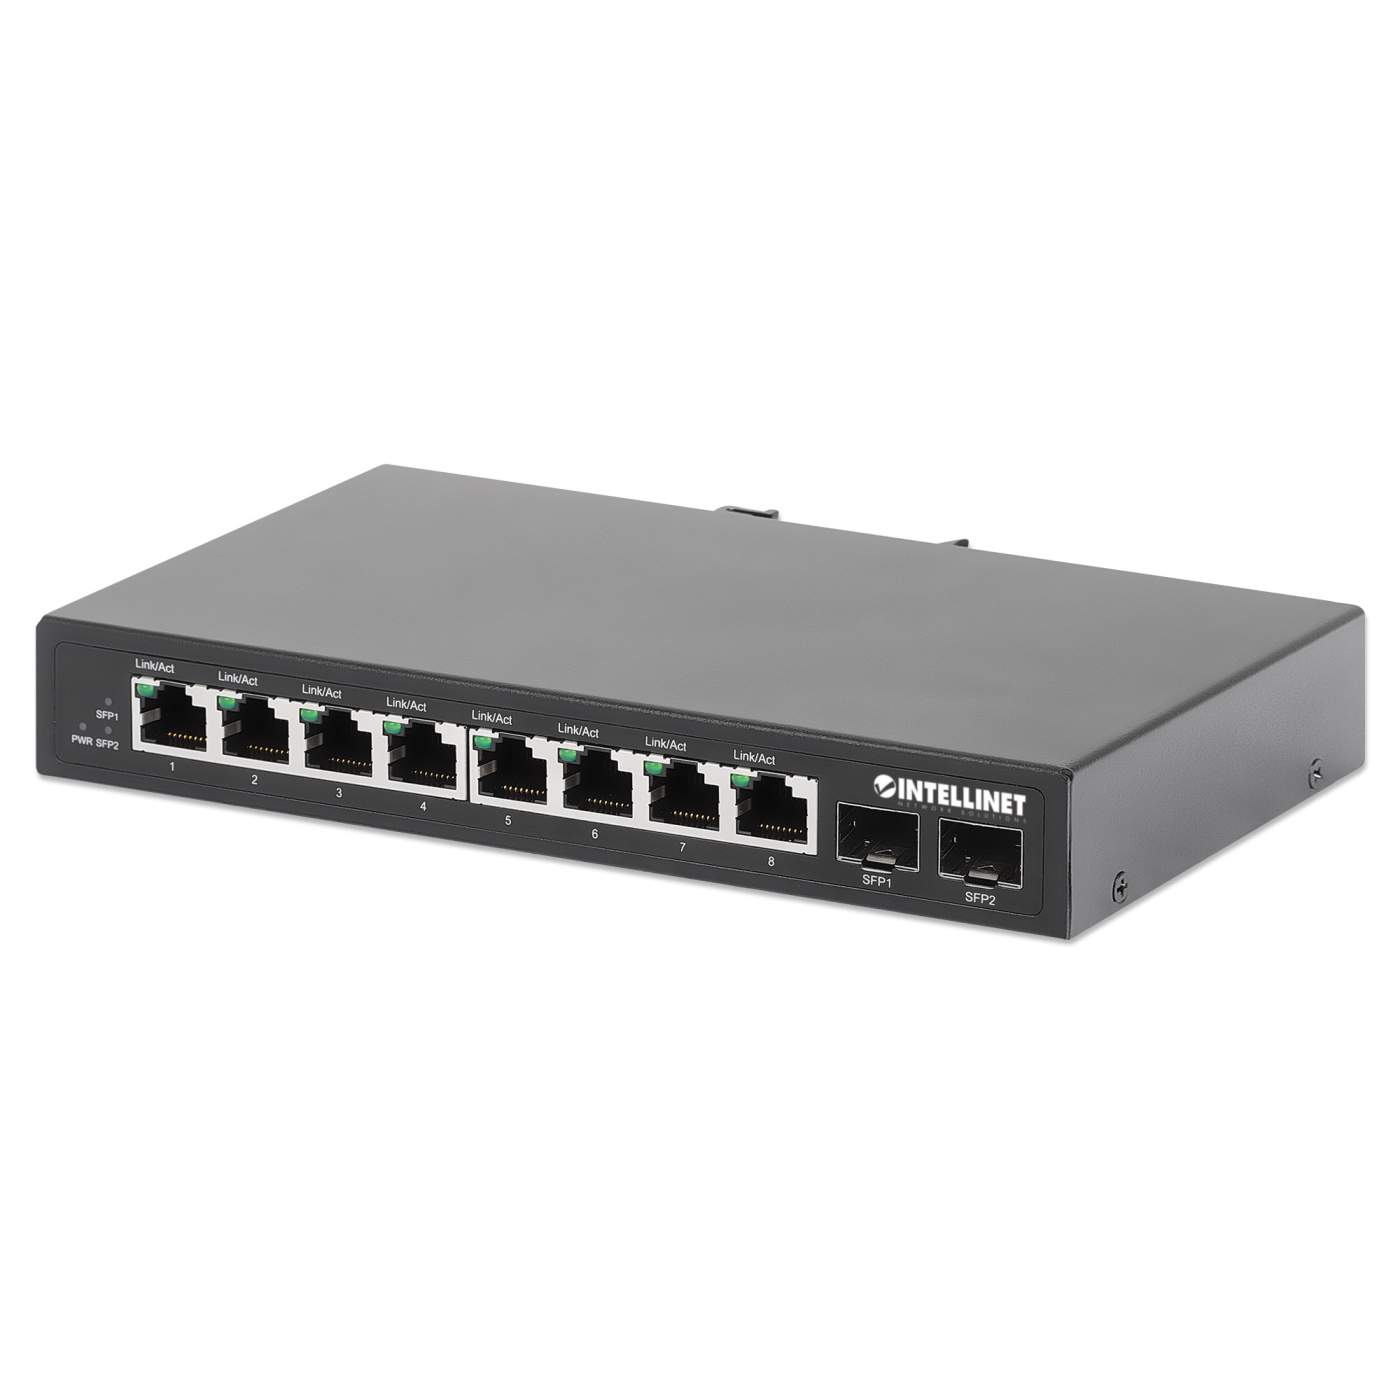 Industrial 8-Port Gigabit Ethernet Switch with 2 SFP Ports